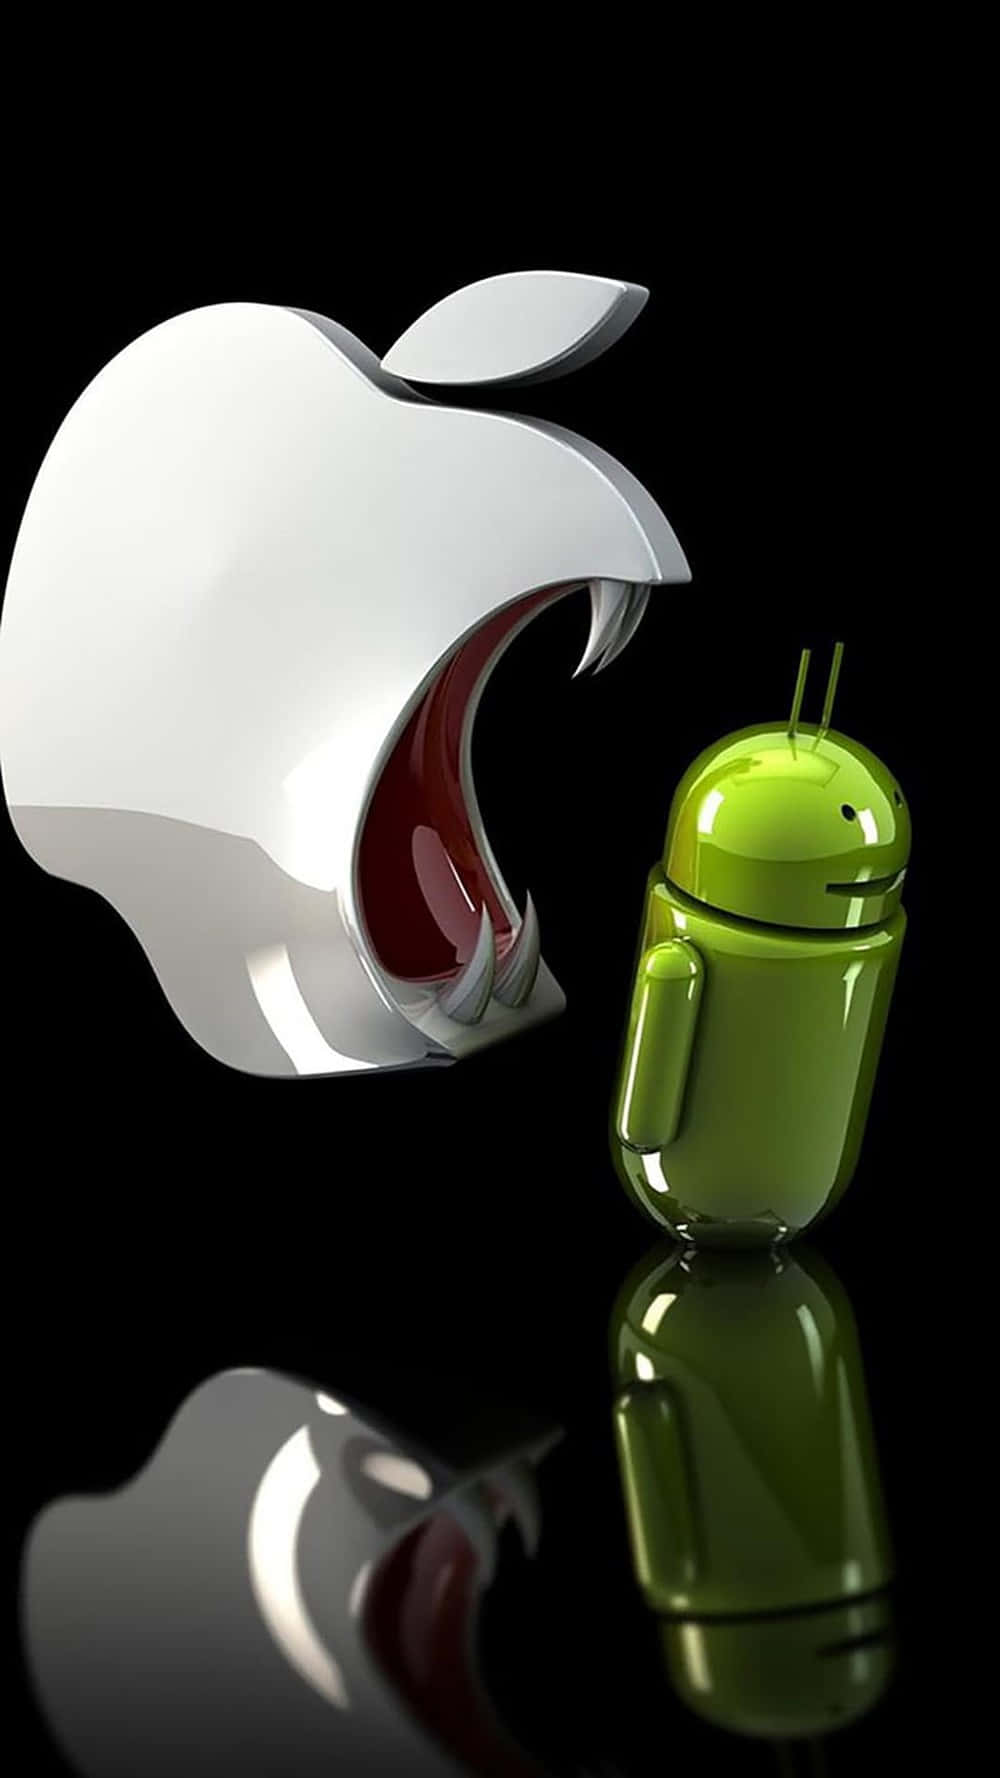 Two Tech Giants, Apple And Android, Side By Side Wallpaper